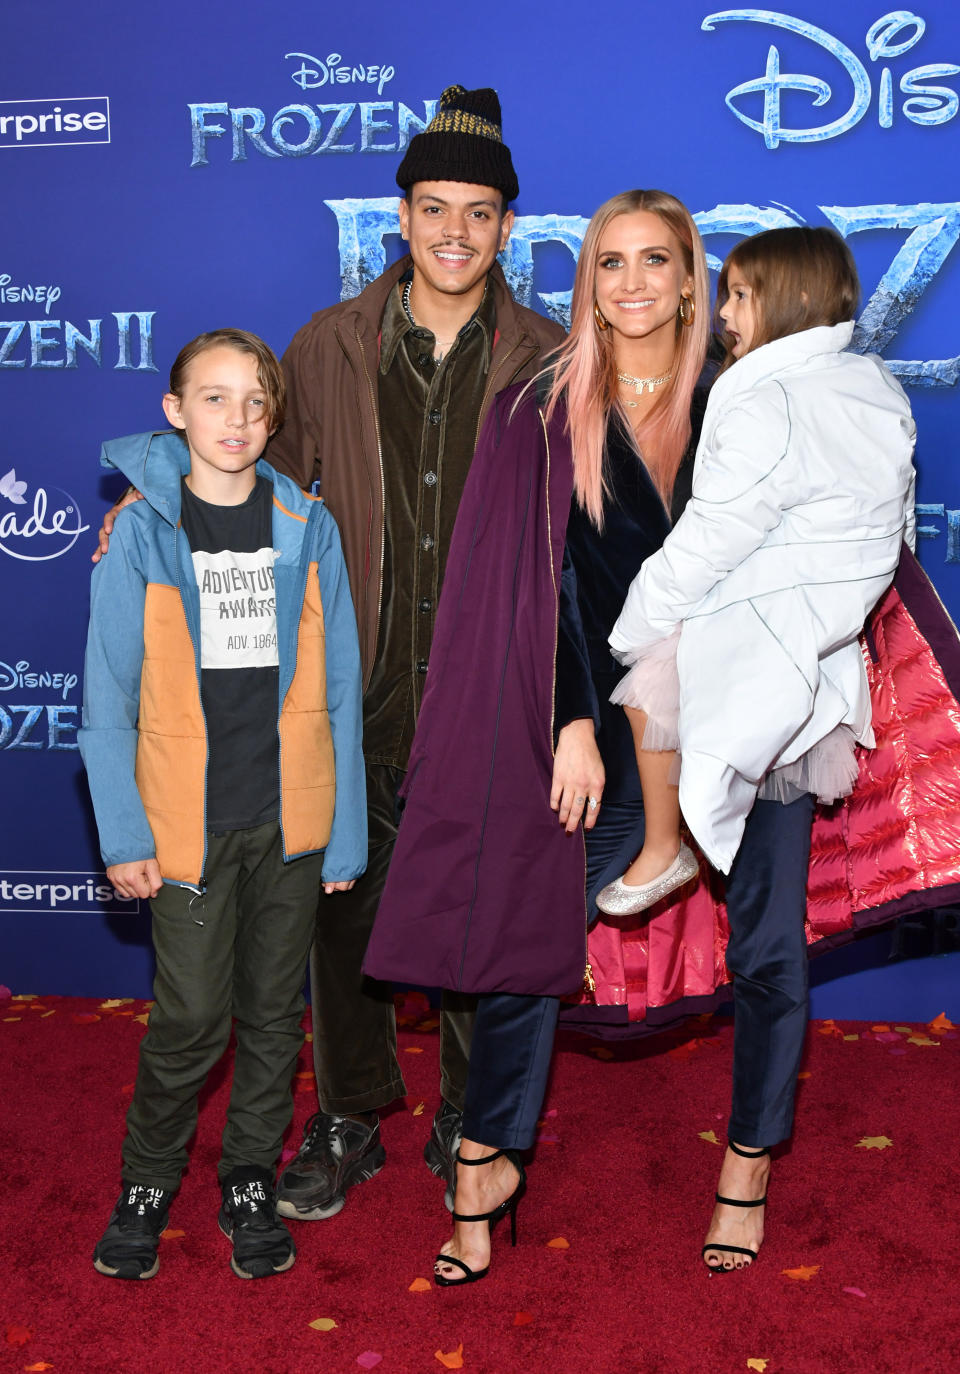 Bronx Wentz, Evan Ross, Ashlee Simpson and Jagger Snow Ross attend the premiere of Disney's "Frozen 2" at Dolby Theatre on November 07, 2019